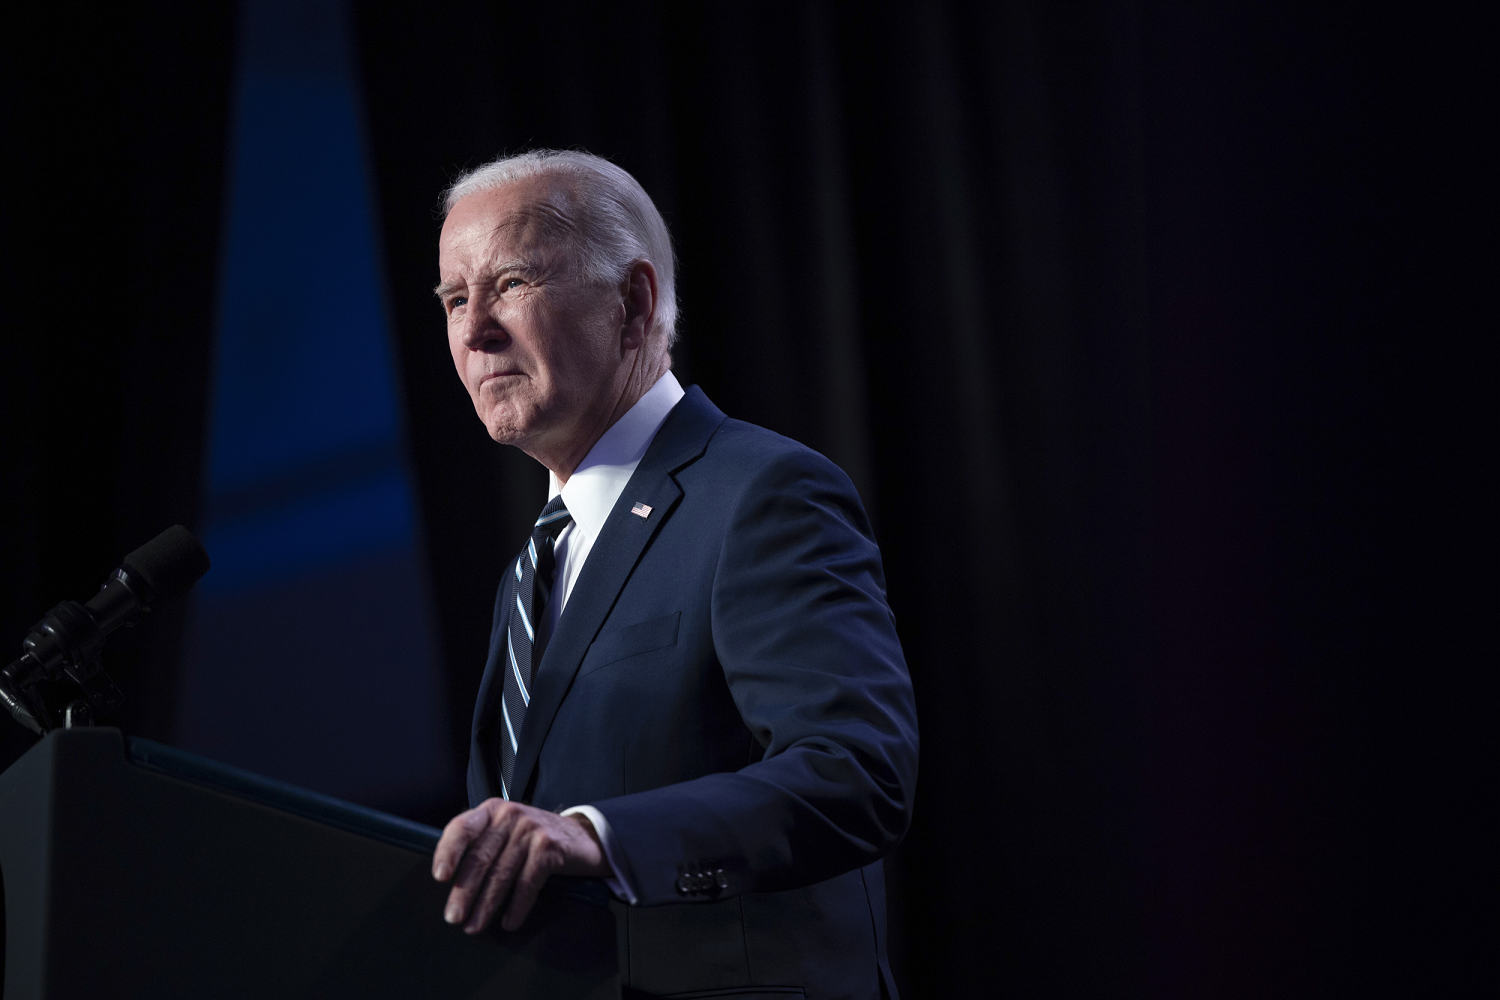 Biden announces more than 500 sanctions on Russia after Alexei Navalny’s death